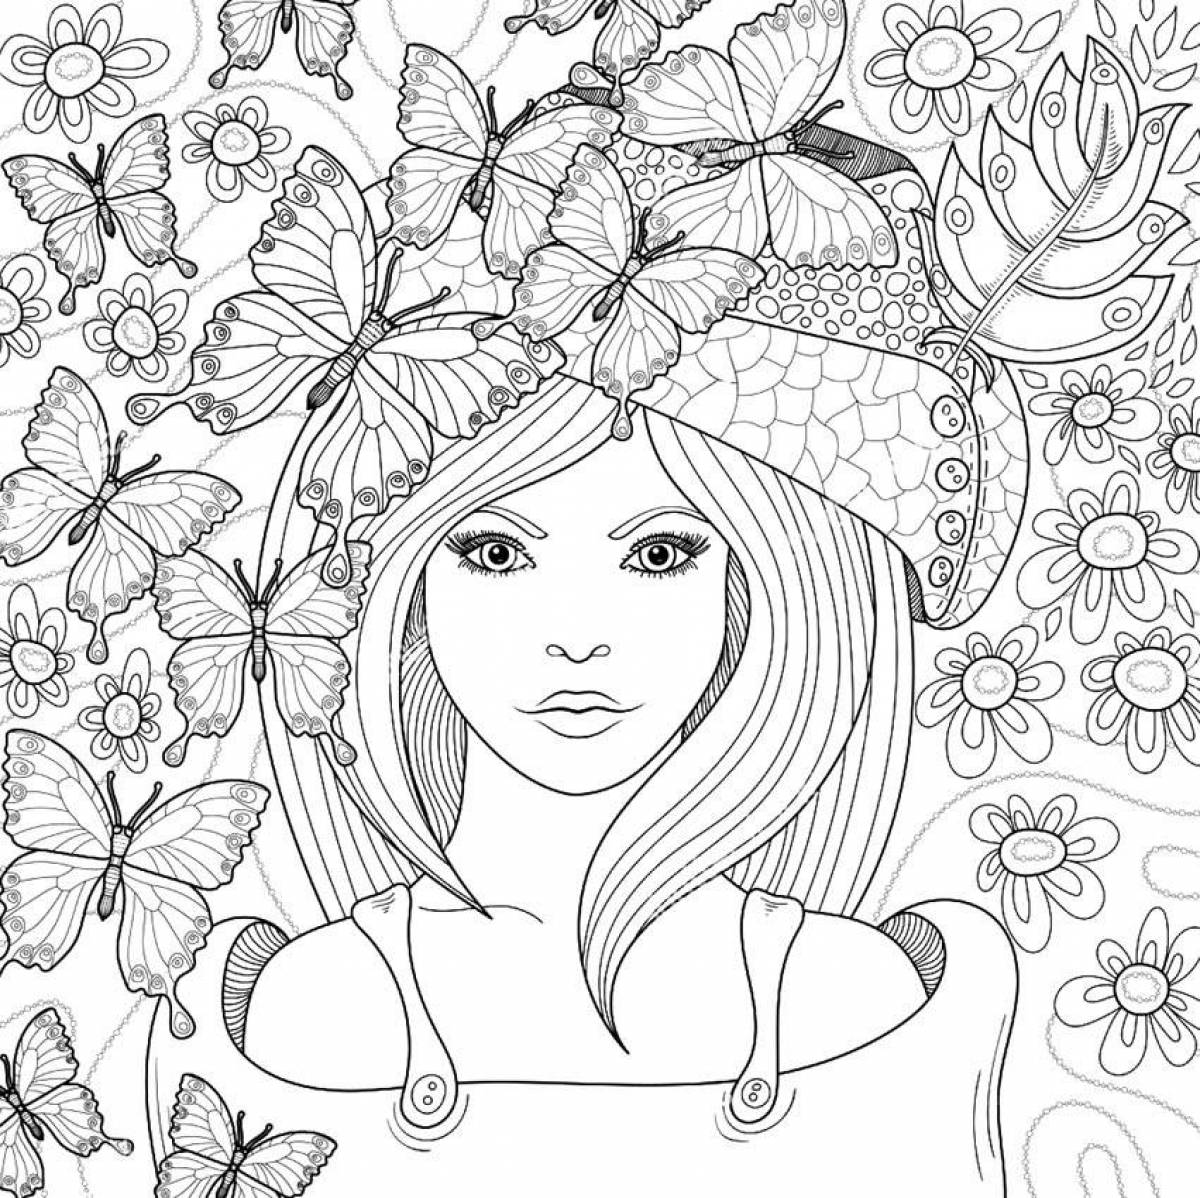 Impressive coloring book for girls 10 years old